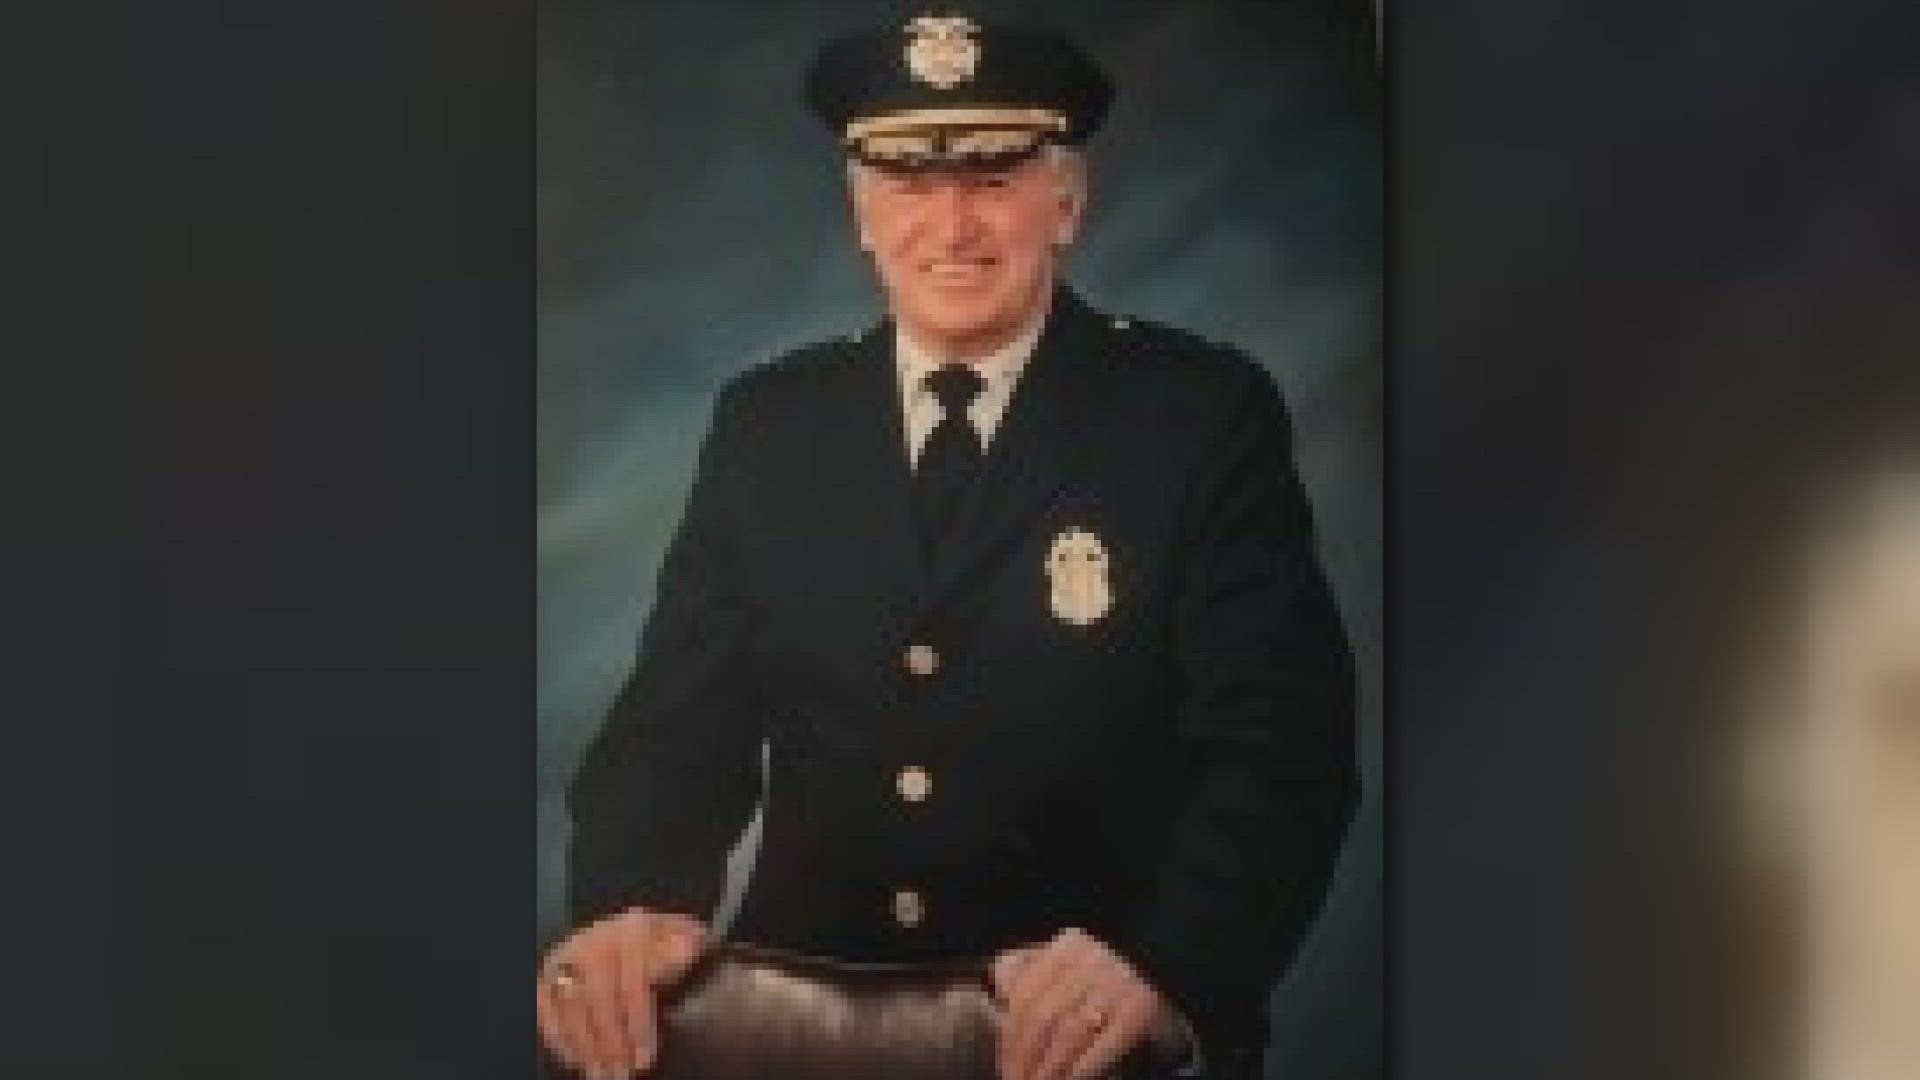 He served with the Denver Police Department for 34 years, eventually rising to the rank of division chief, but he was best known by many as a "King's" close friend.